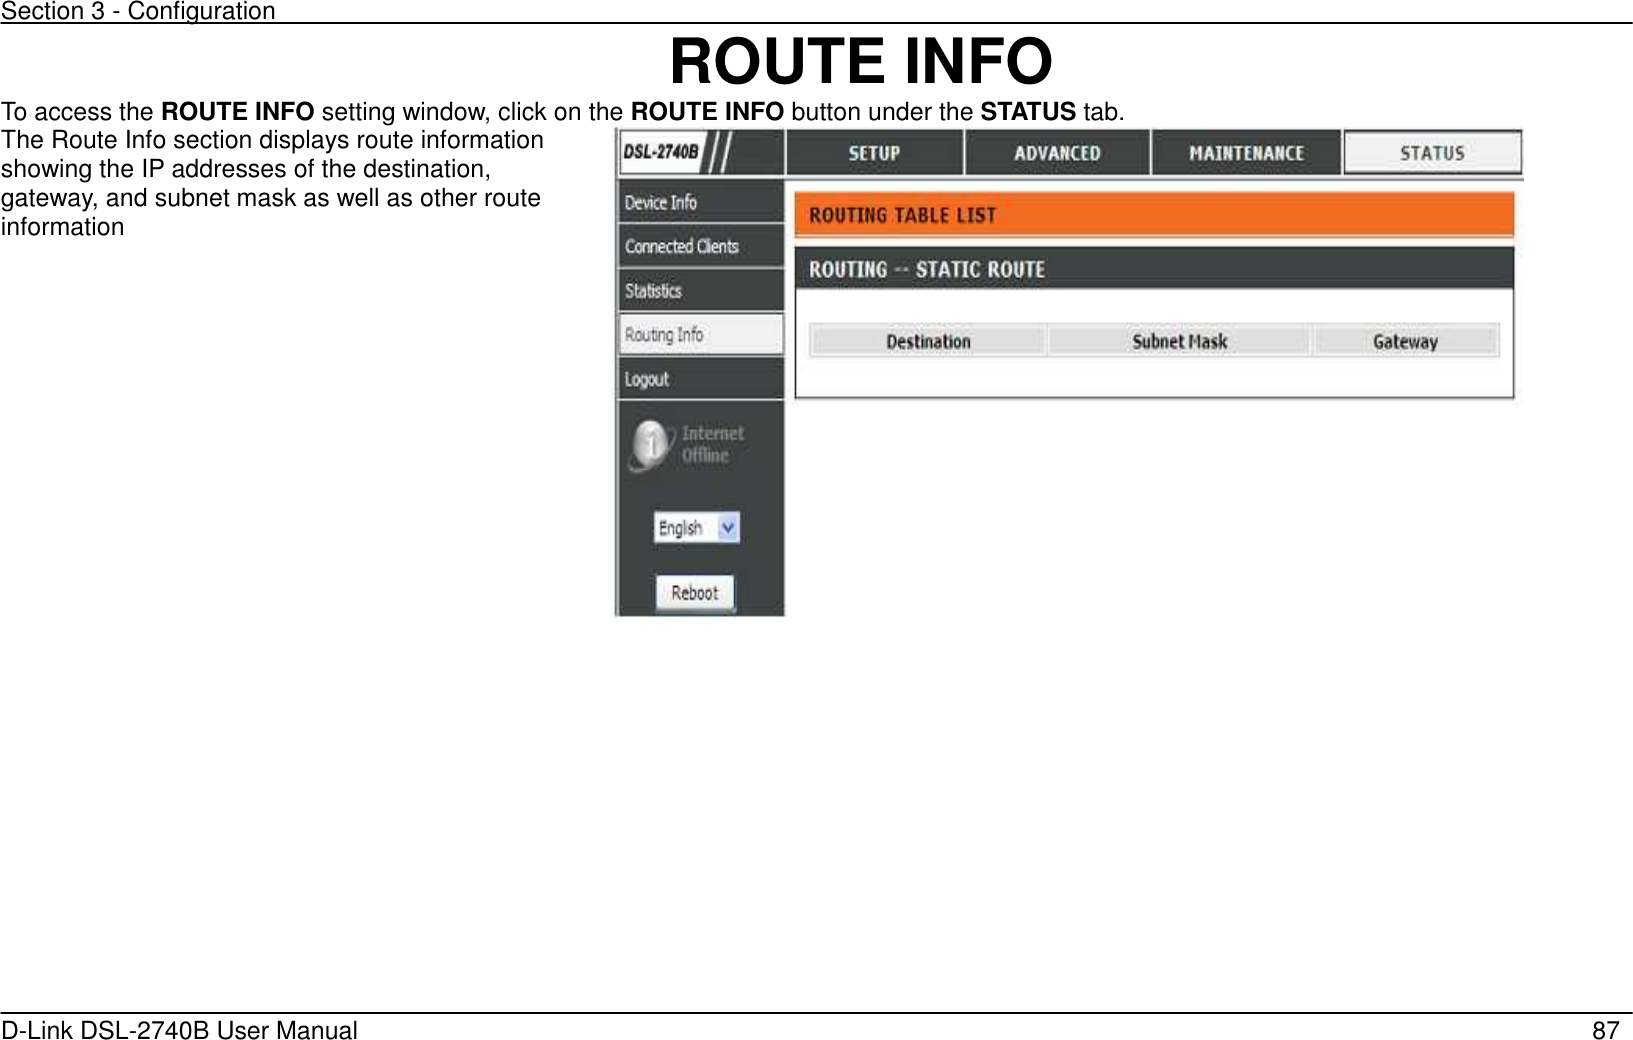 Section 3 - Configuration   D-Link DSL-2740B User Manual                                                  87 ROUTE INFO To access the ROUTE INFO setting window, click on the ROUTE INFO button under the STATUS tab. The Route Info section displays route information showing the IP addresses of the destination, gateway, and subnet mask as well as other route information  